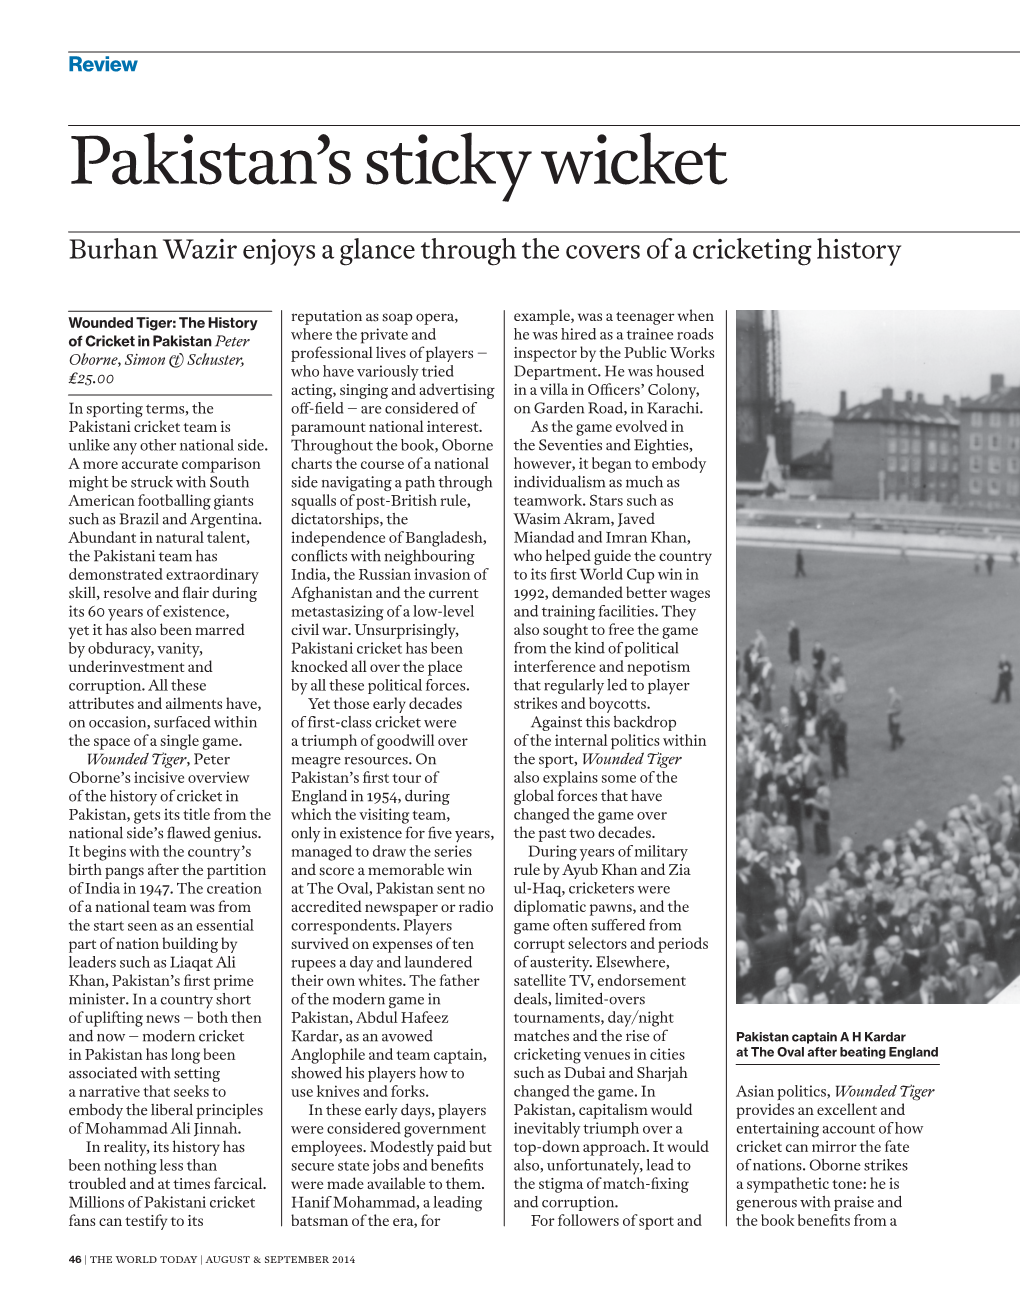 Wounded Tiger the History of Cricket in Pakistan